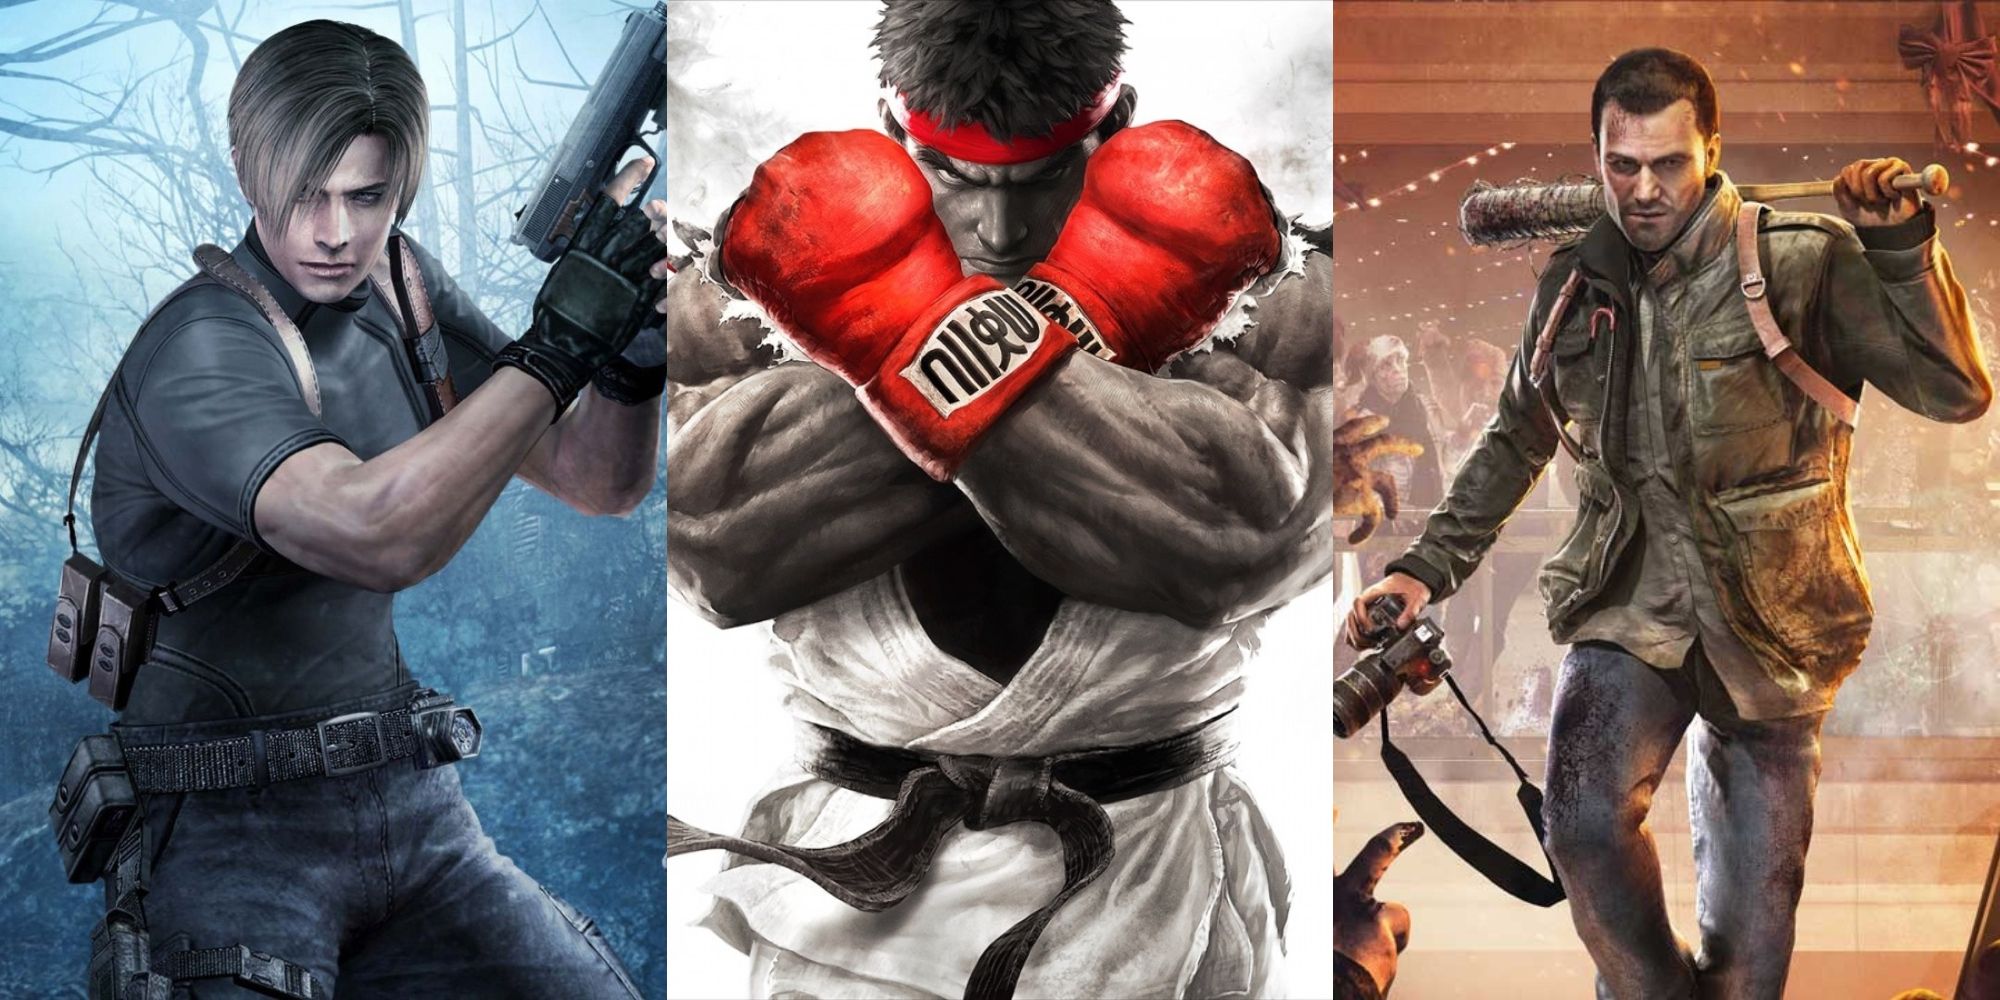 Screenshots of Street Fighter, Dead Rising and Resident Evil.